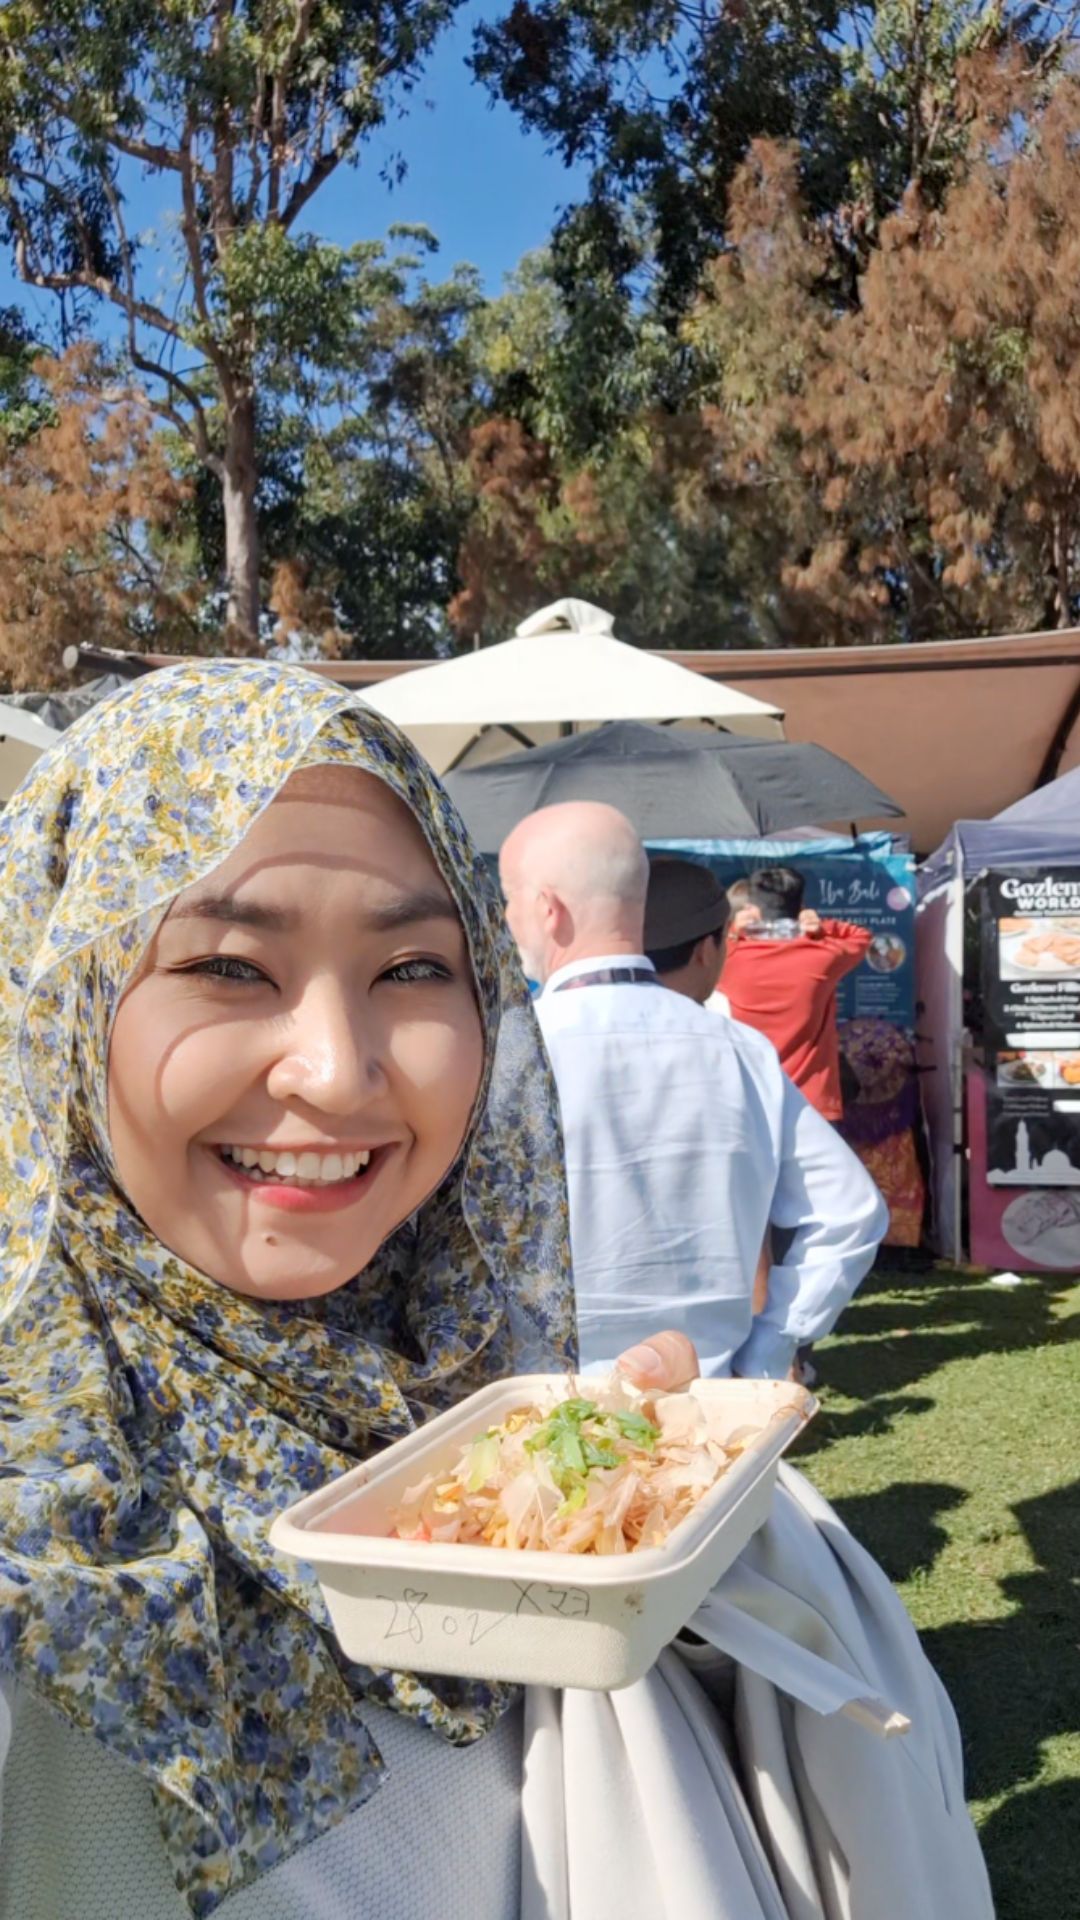 Enjoying some Indonesian food at the campus Market Day.